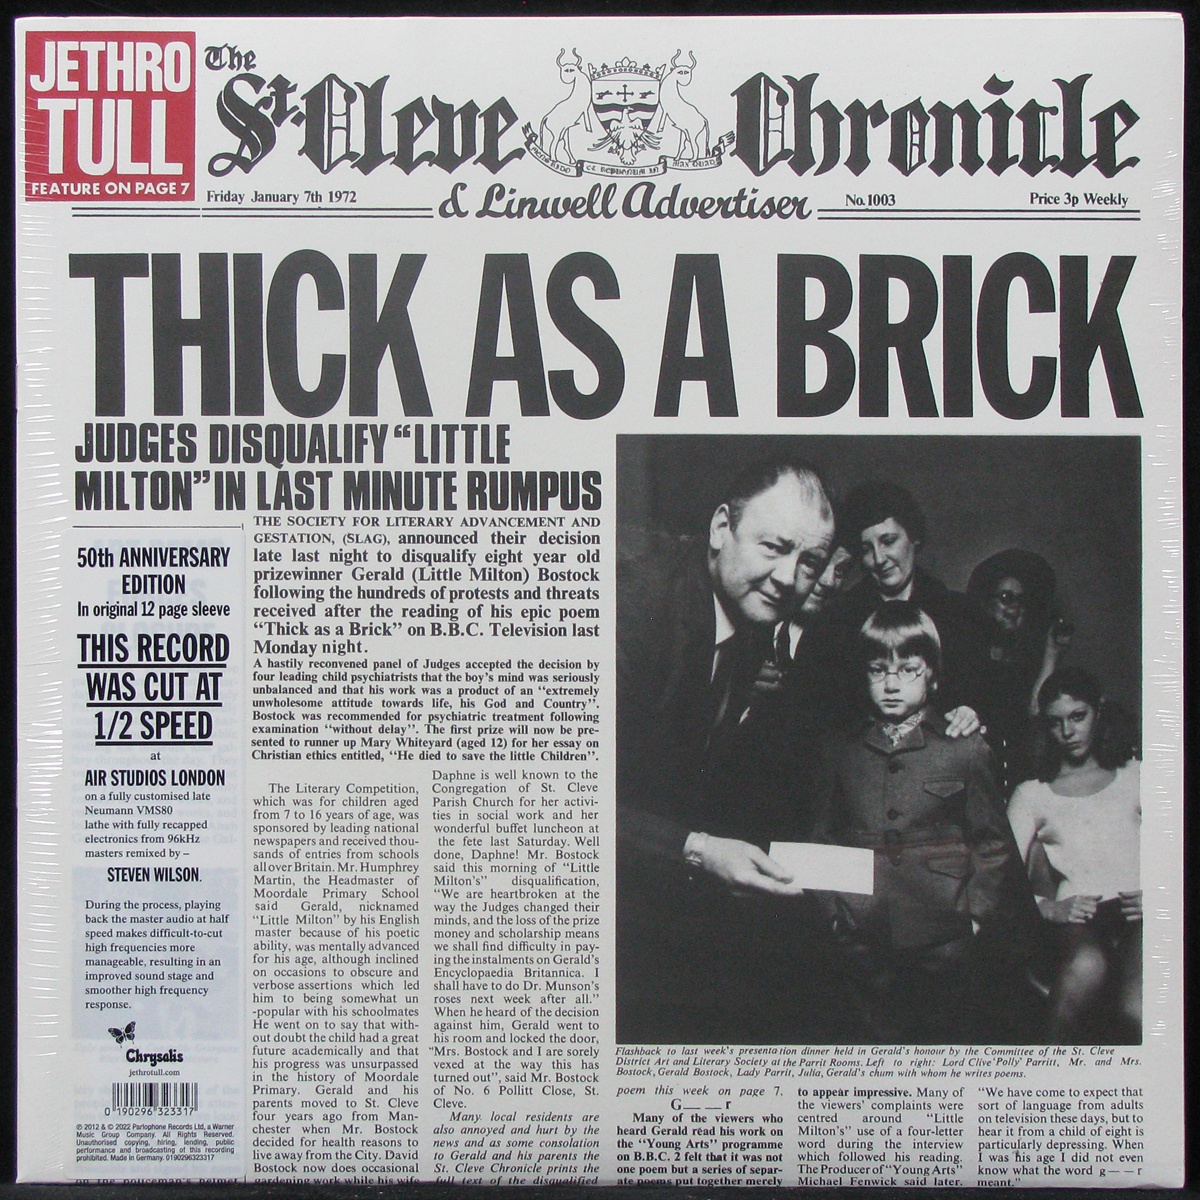 Thick As A Brick